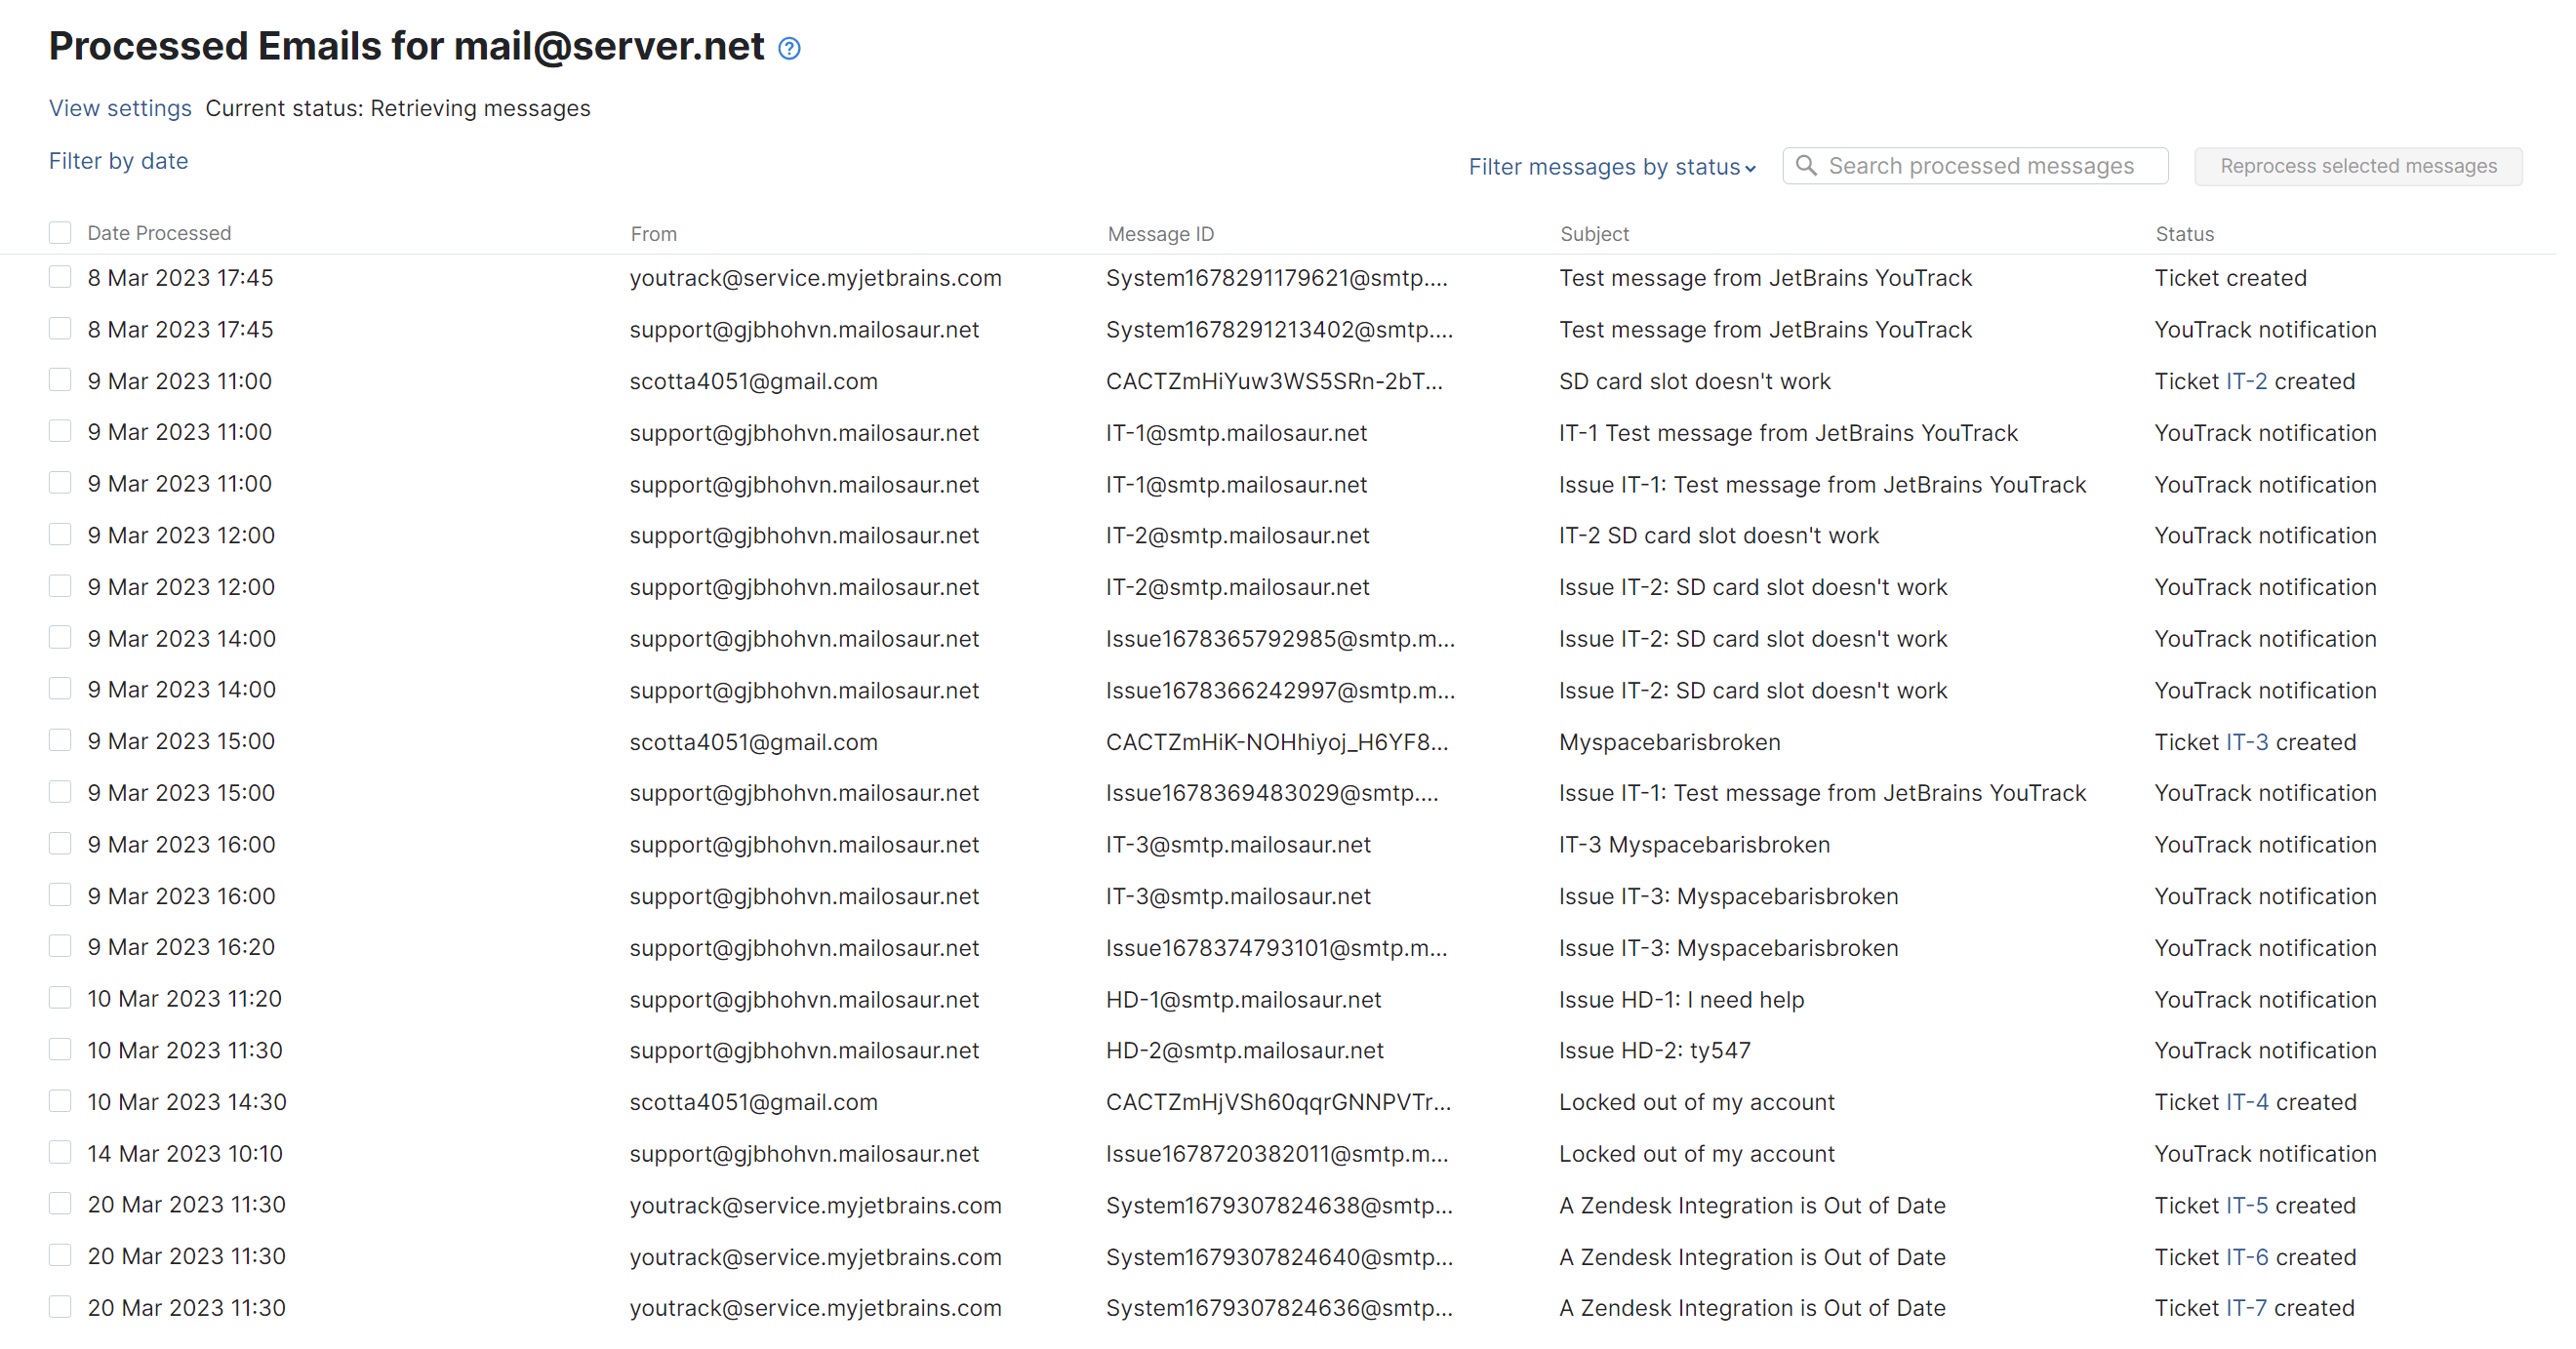 The list of processed email for an integrated mailbox.